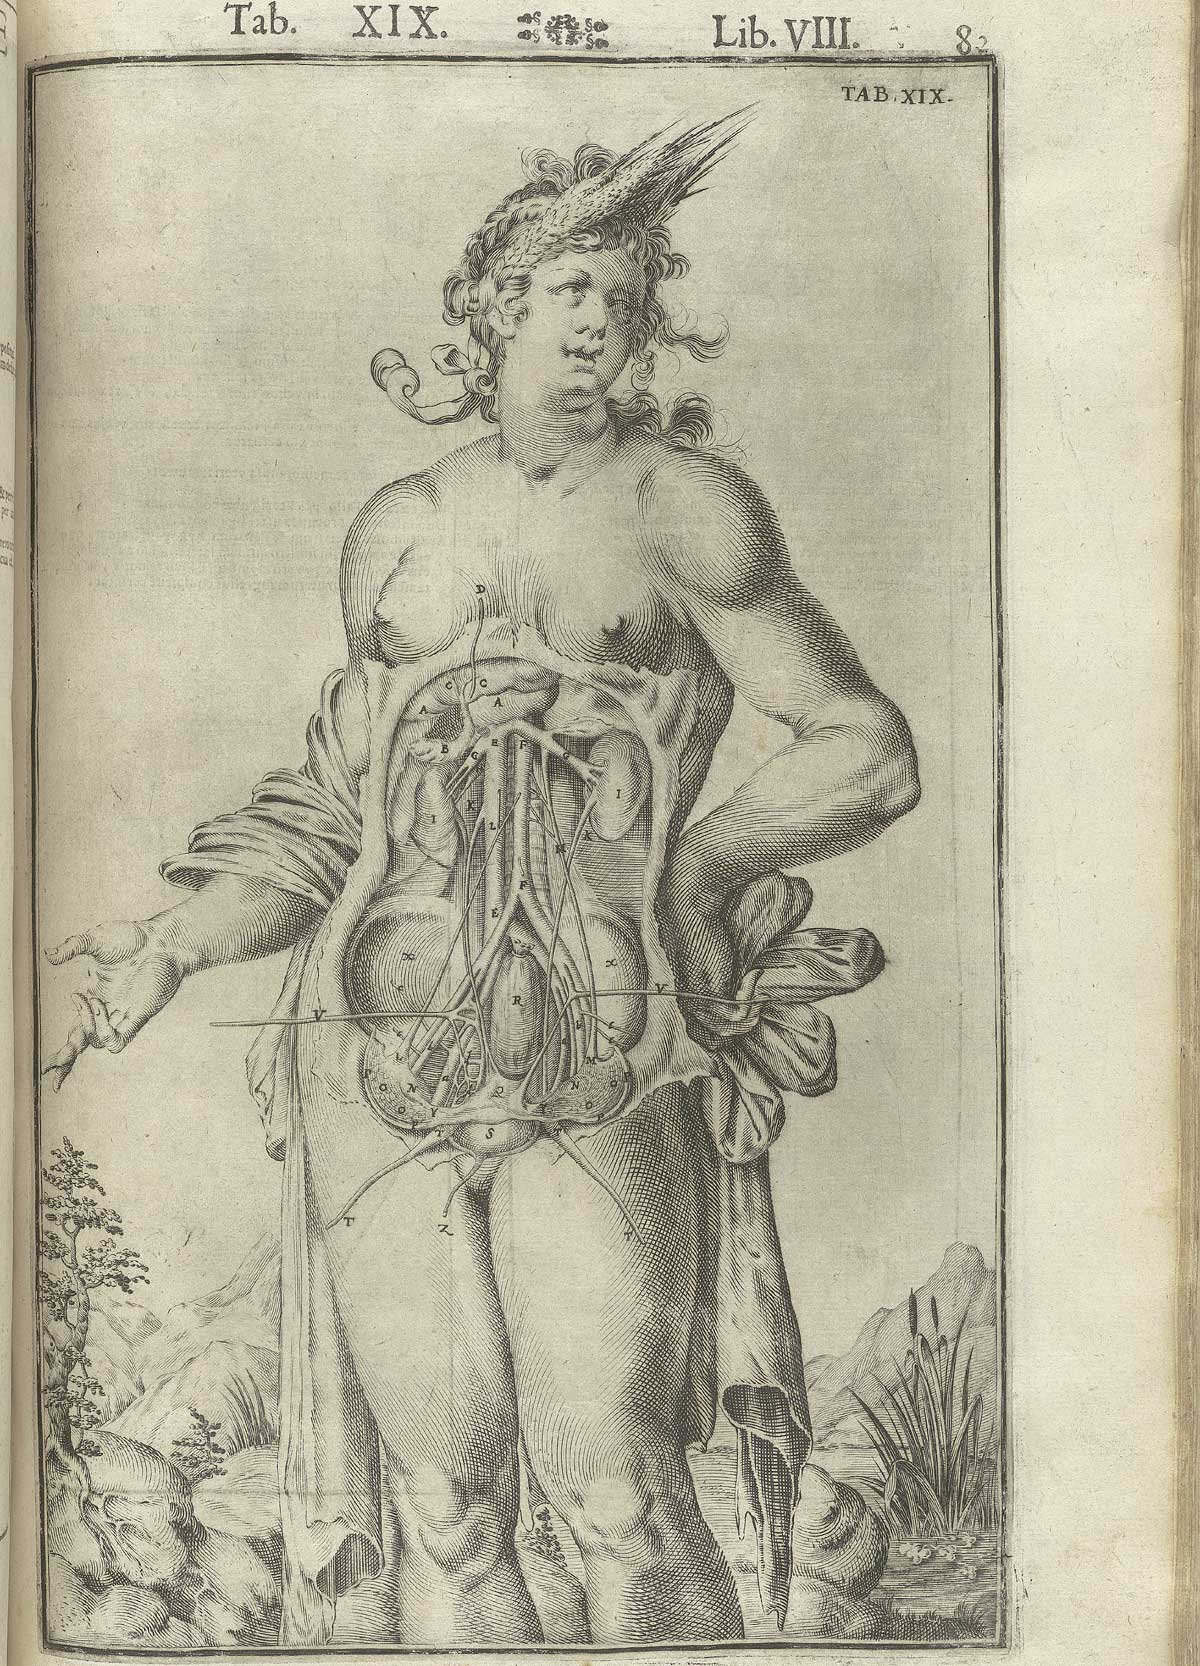 Engraving showing a facing standing nude female anatomical figure in a pastoral setting with an open torso and abdomen exposing the urological and reproductive systems including kidneys, ureters, uterus, ovaries, bladder and associated circulatory system; the woman is wearing a set of pointed laurels on her head which give a pointy look to her head; from Adriaan van de Spiegel and Giulio Cassieri’s De humani corporis fabrica libri decem, Venice, 1627, NLM call no. WZ 250 S755dh 1627.